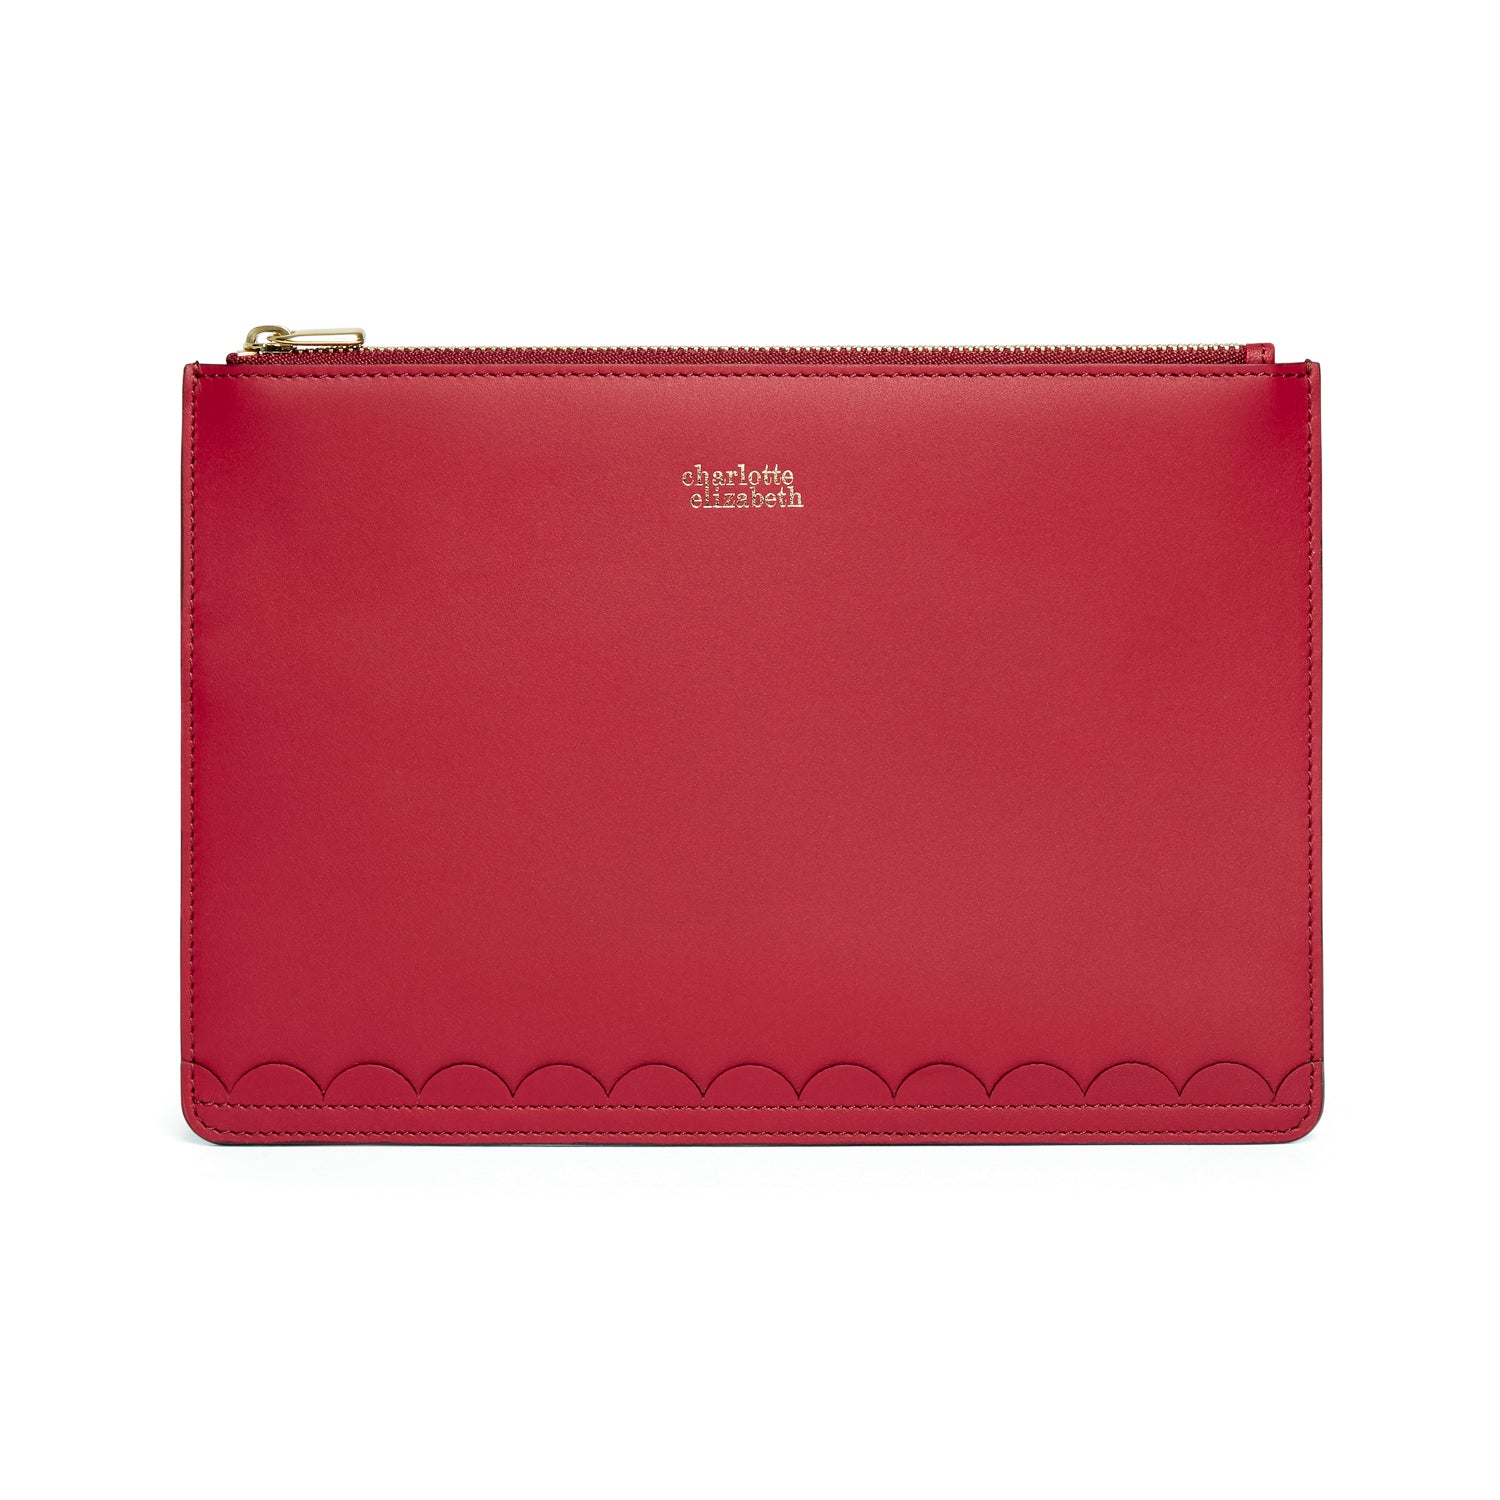 Handmade using soft yet durable authentic Spanish leather and lined with 100% cotton, this elegant rectangular pouch can be used as a clutch purse. Roomy enough to fit an iPad mini.